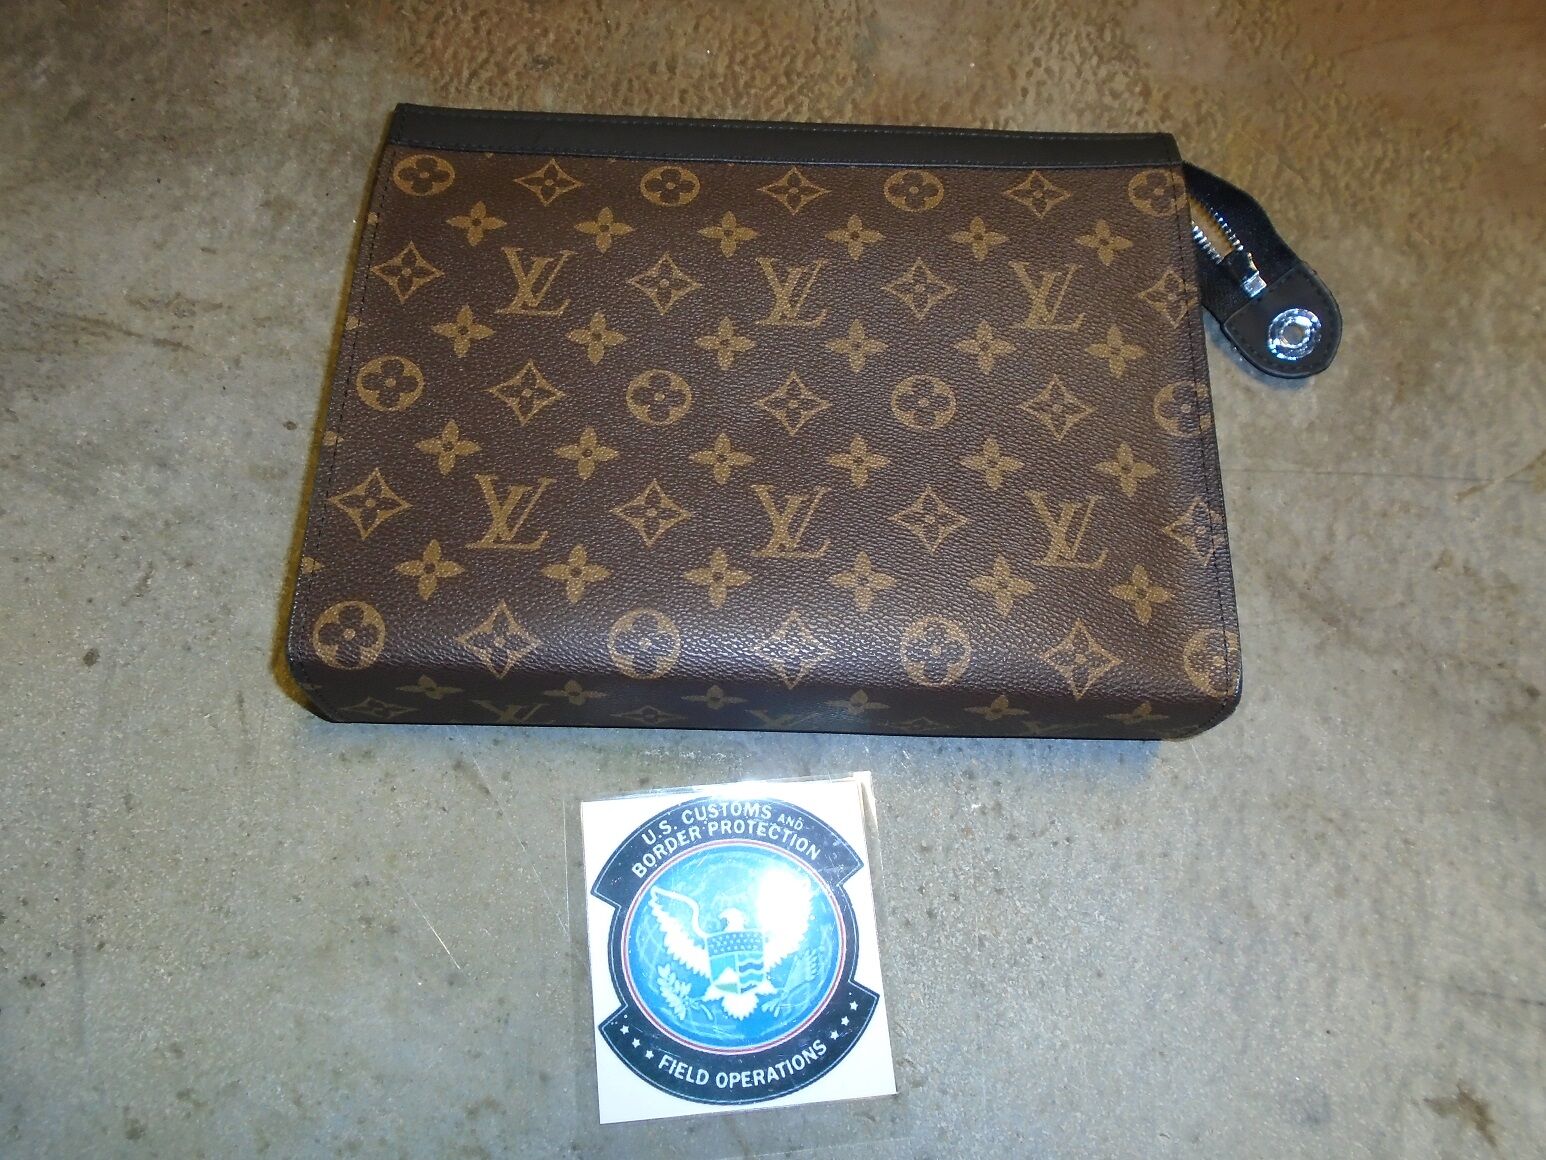 lv and gucci